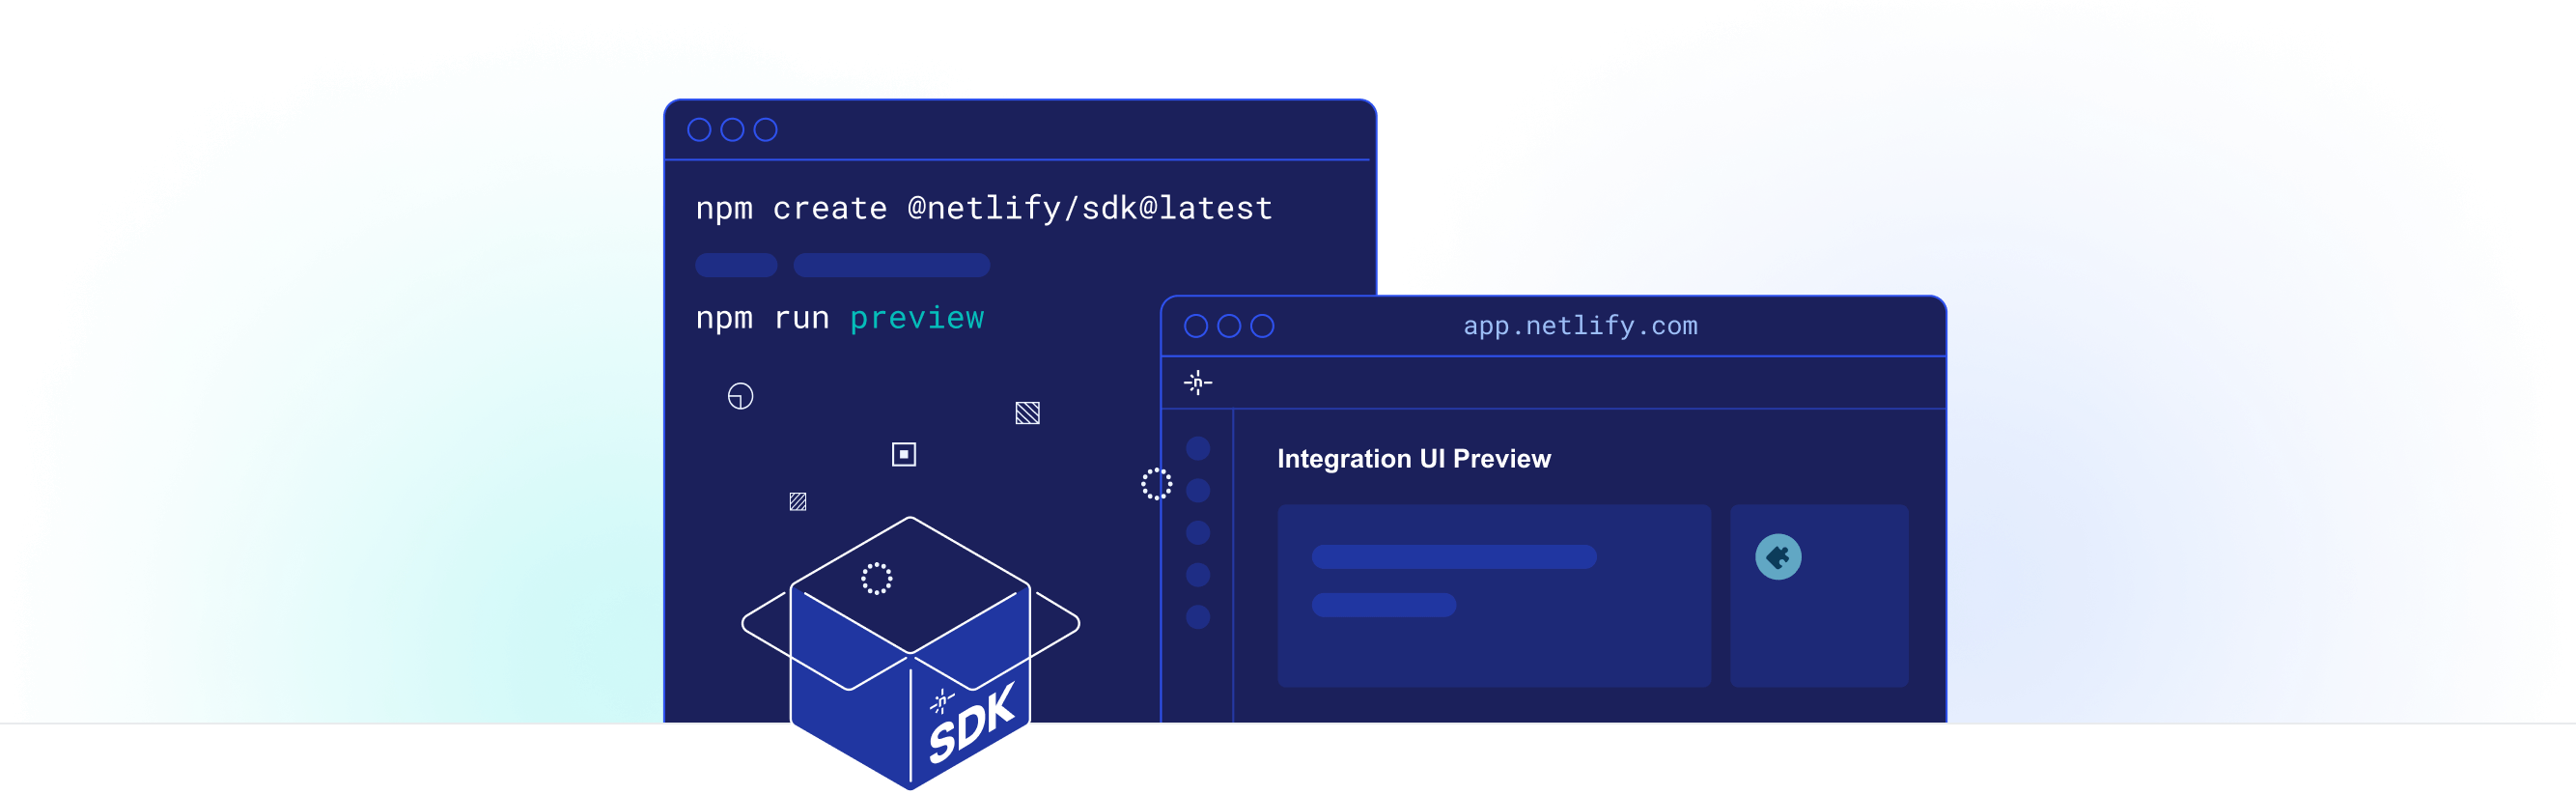 Illustration of a terminal window with the text "npm create @netlify/sdk@latest" and "npm run preview" and a browser window showing SDK integrations.